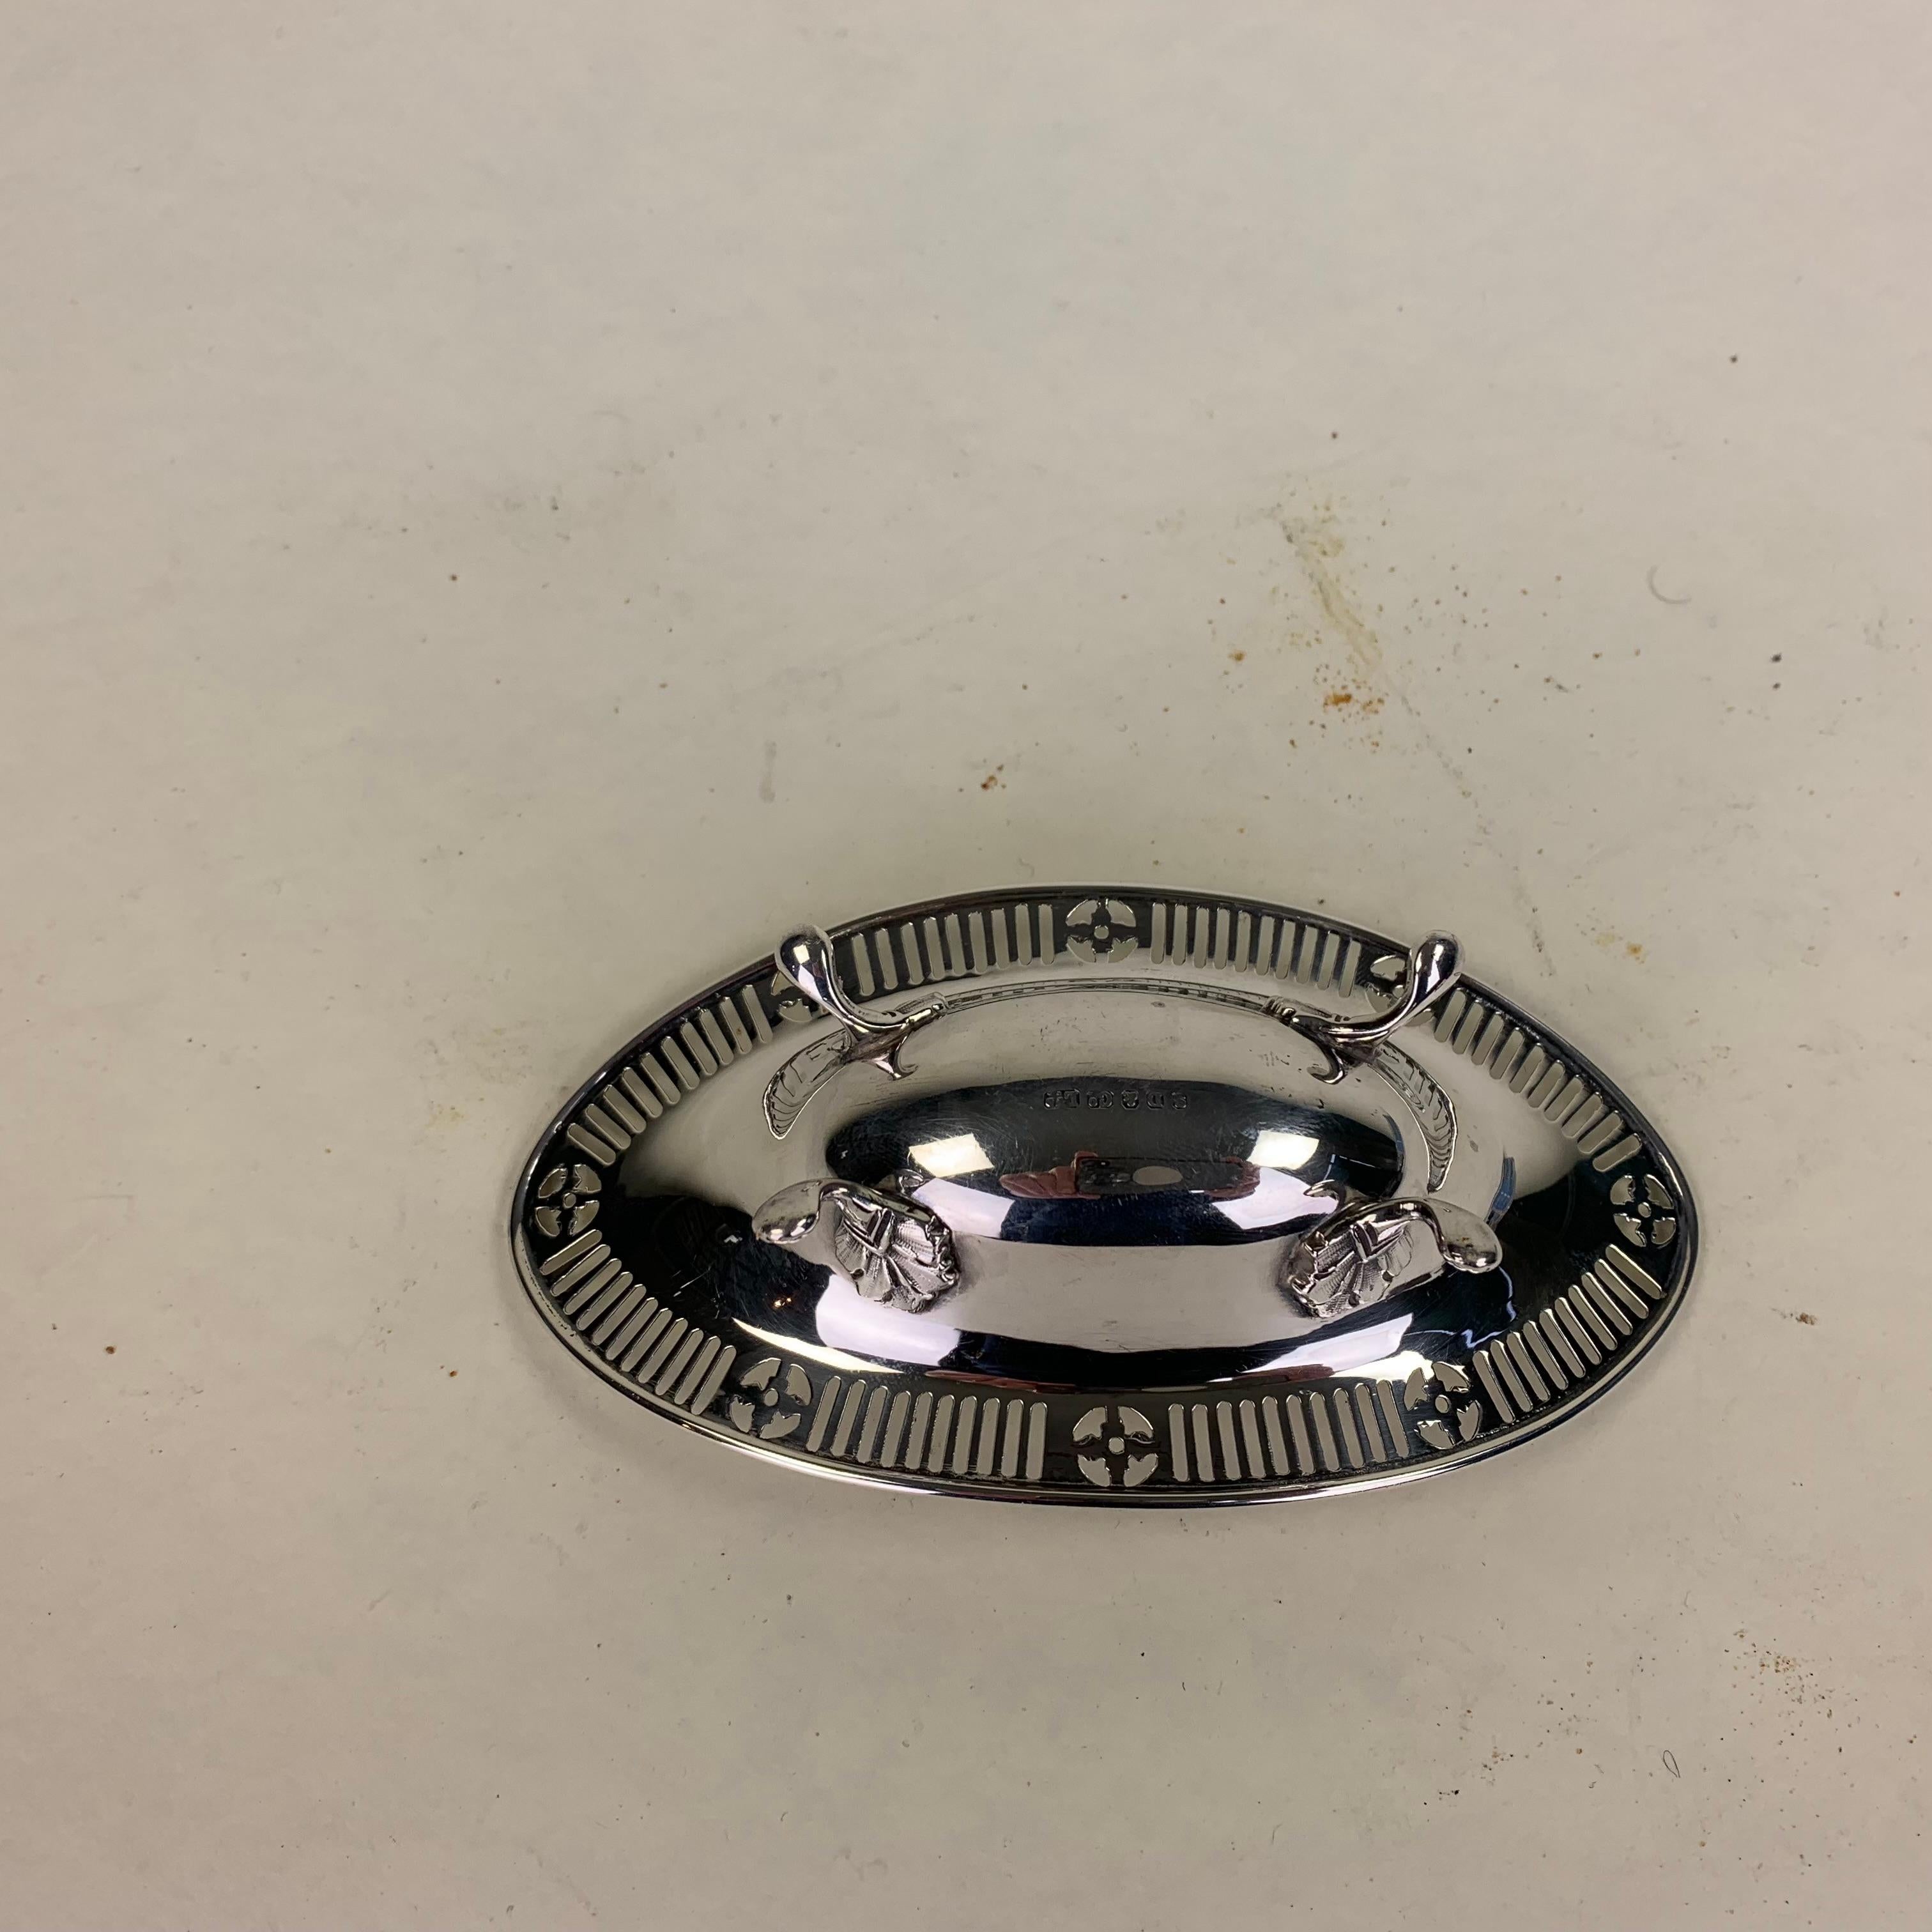 Pierced Silver Oval Sweetmeat Dish by Atkin Bros In Fair Condition For Sale In Folkestone, GB